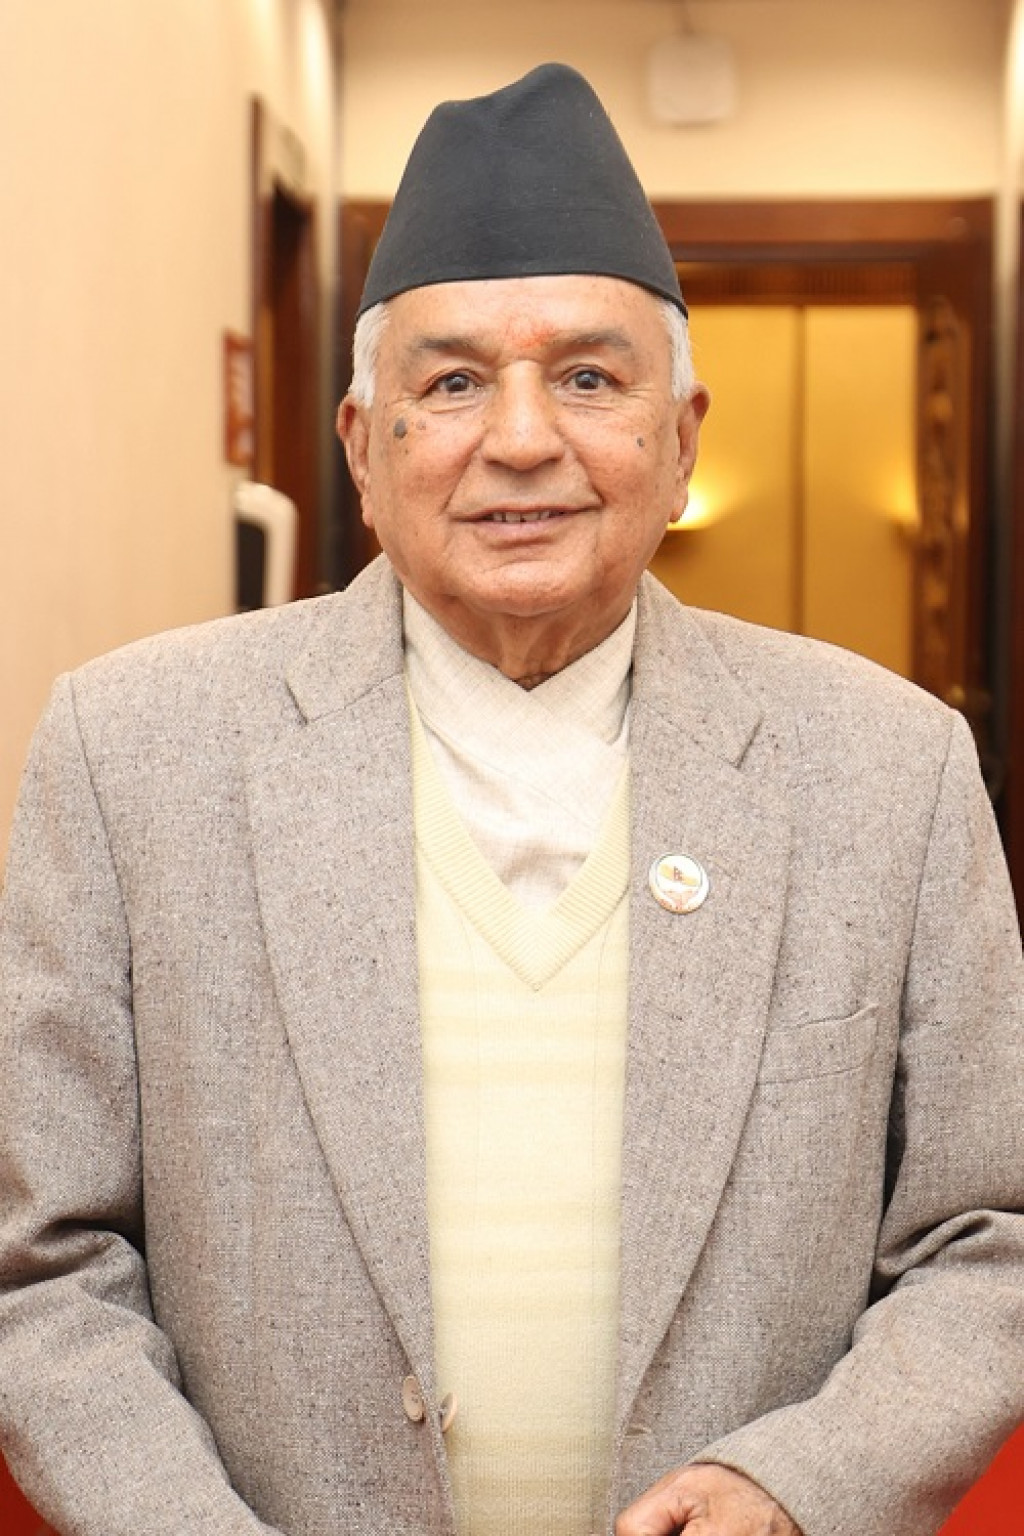 Major responsibility to adhere to constitution fully: Senior leader Poudel